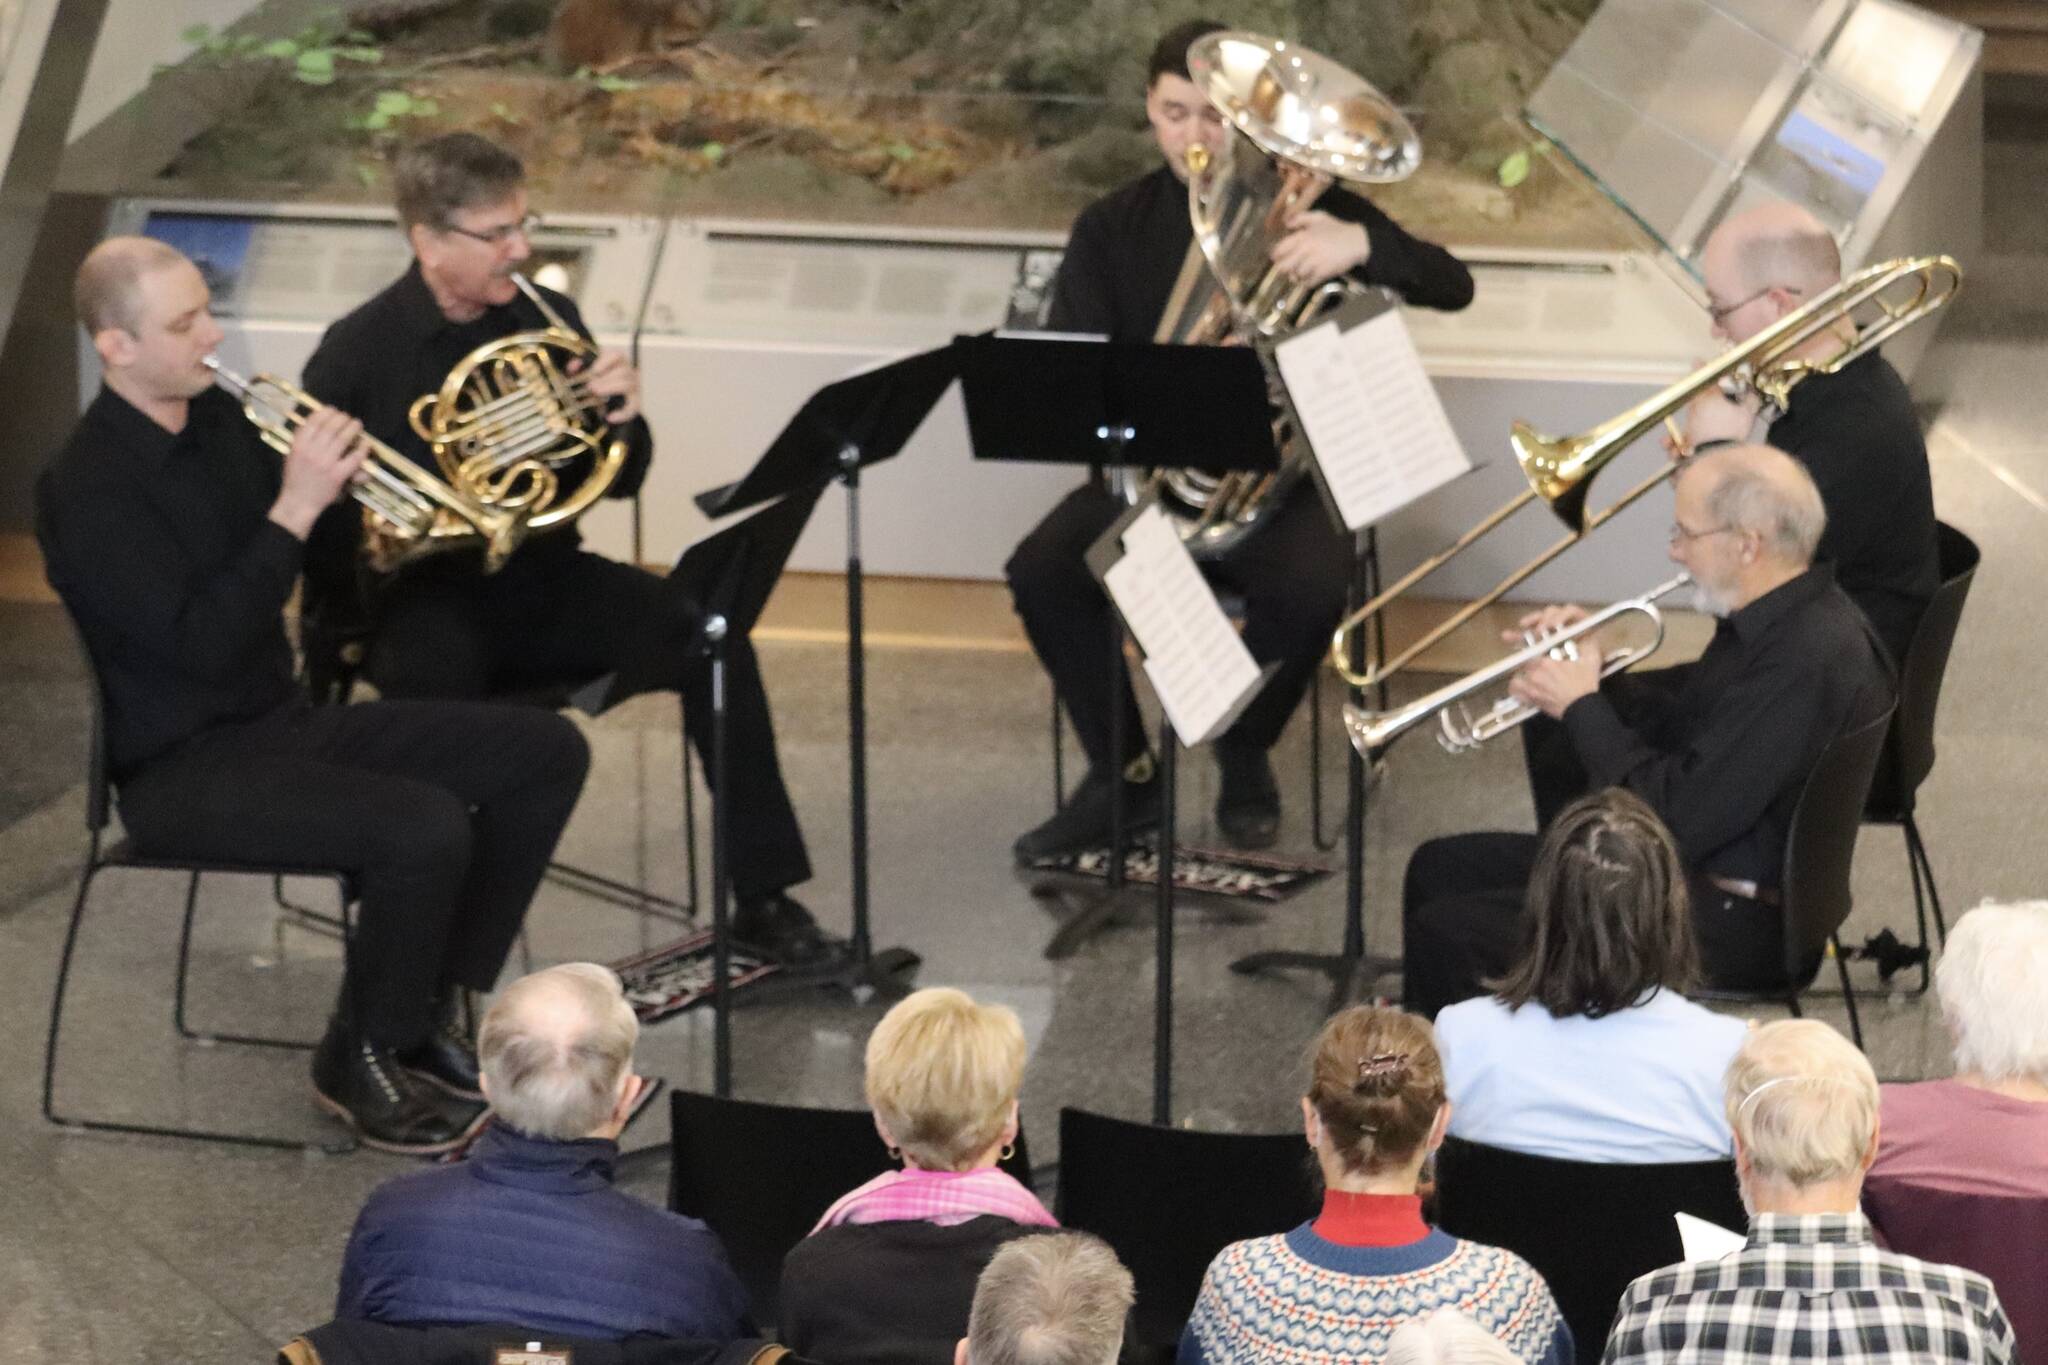 From left to right, Stephen Young, Bill Paulick, Alan Young, Jared Lear and Jack Hodges perform together as the Juneau Brass Quintet on Saturday at the Alaska State Museum for their season-ending show. (Jonson Kuhn / Juneau Empire)